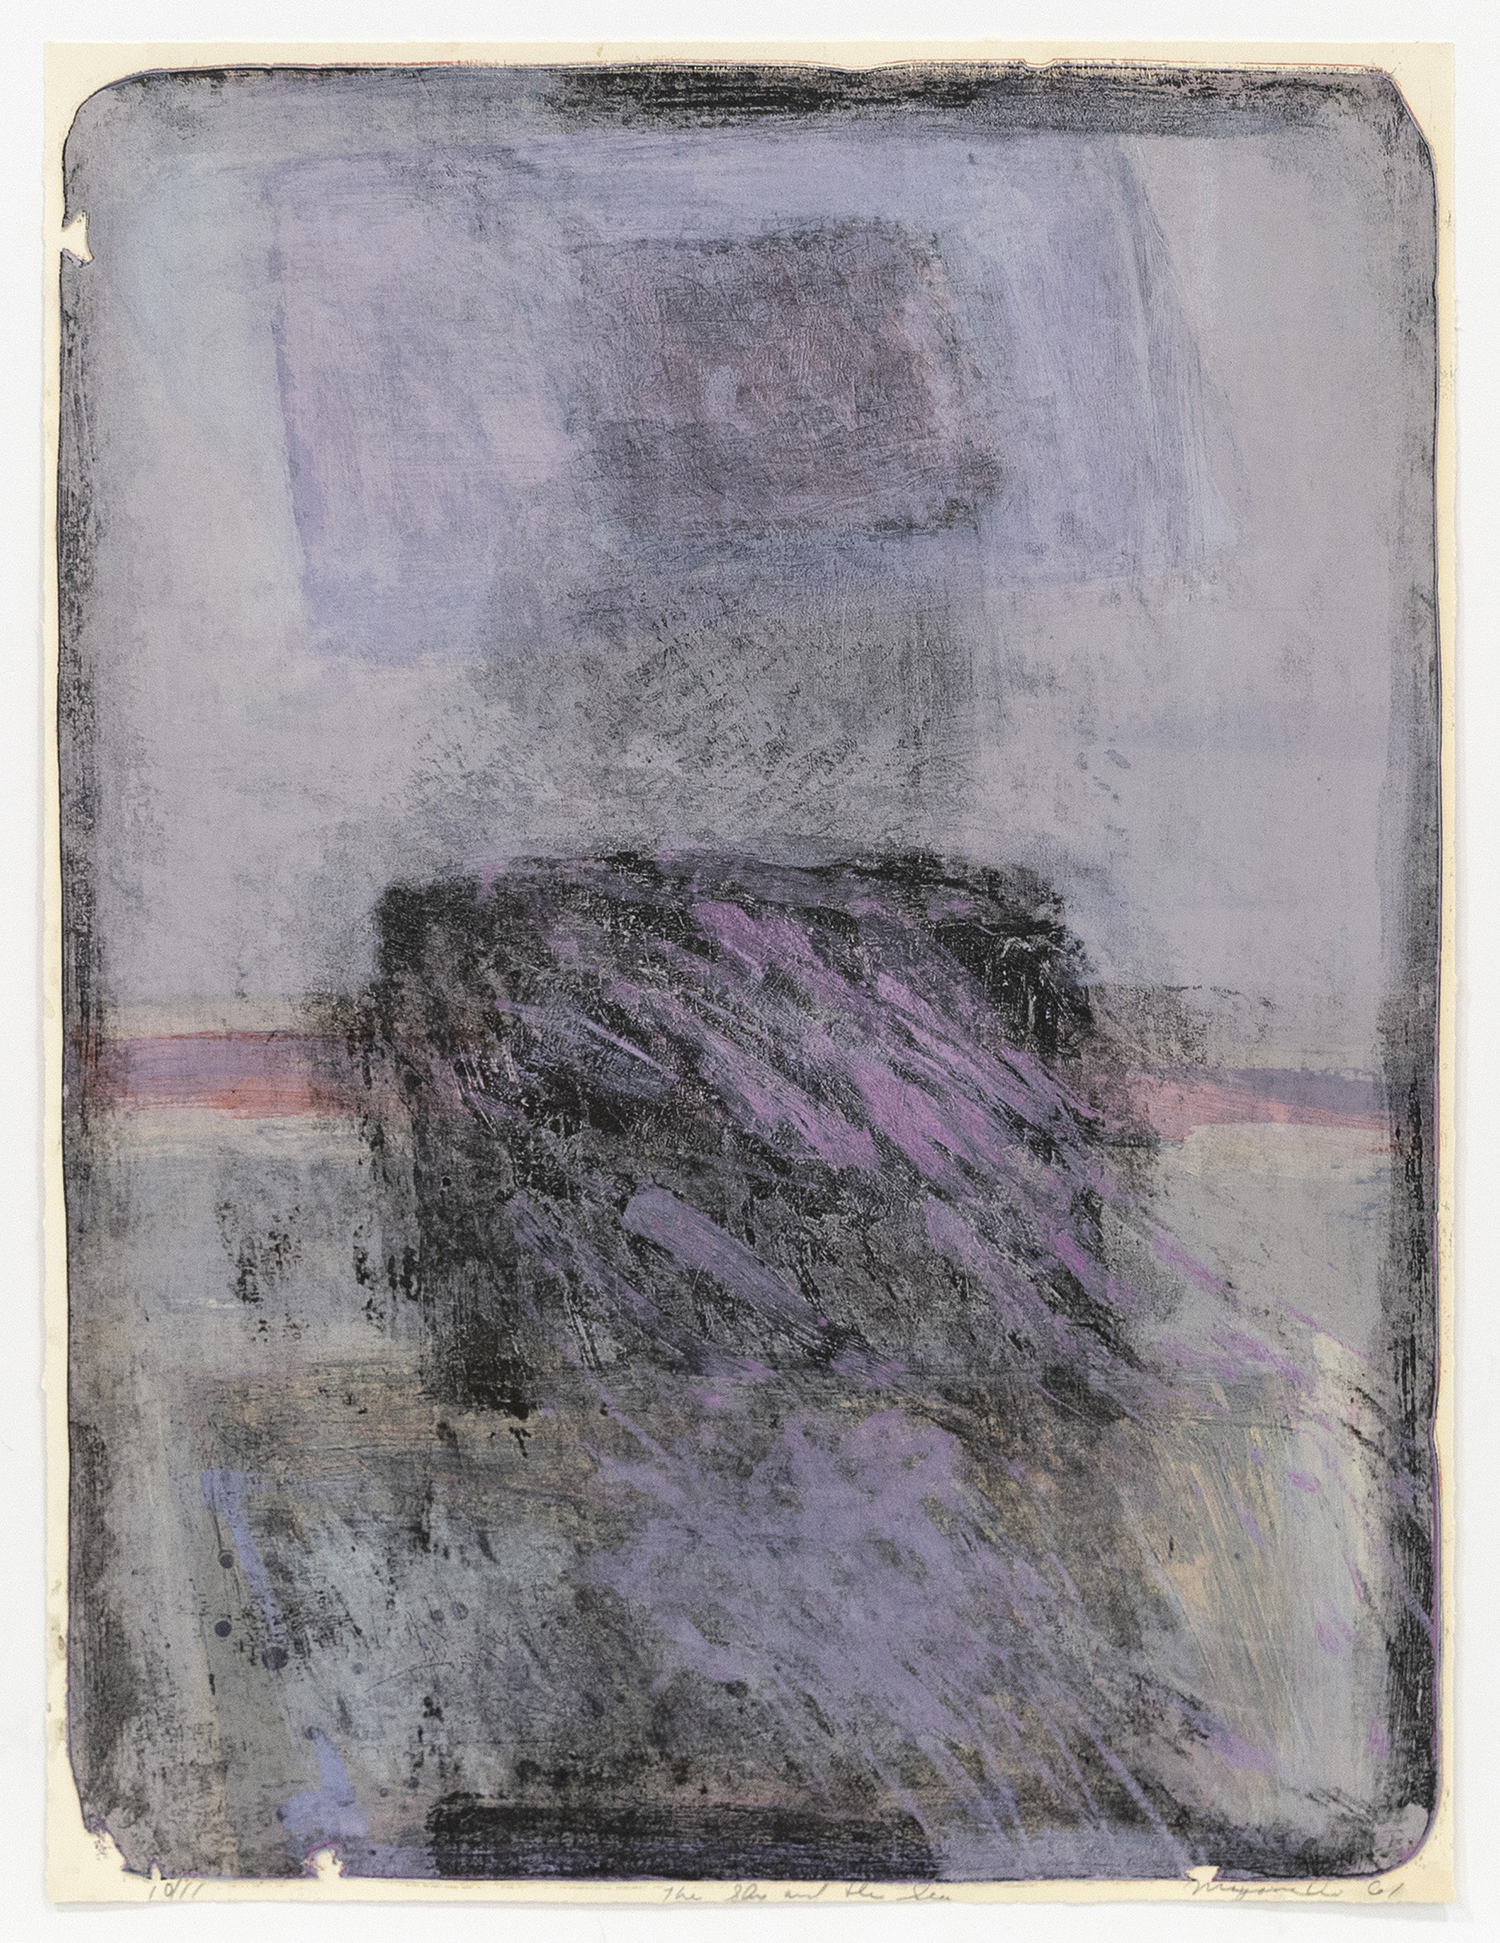 The Sky and the Sea, 1961, Lithograph, 25 1/2 x 19 1/2 inches (64.8 x 49.5 cm), Edition of 11